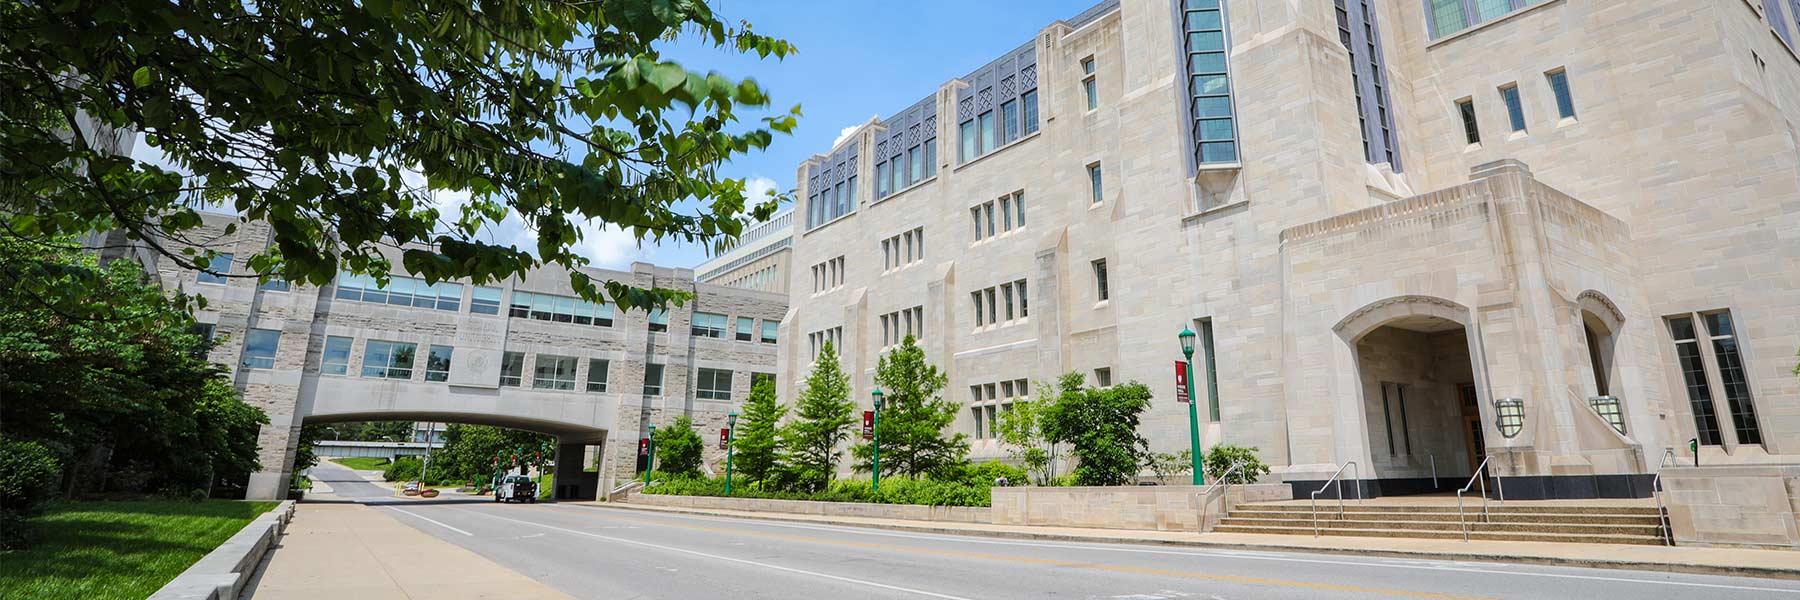 Daytime view of the Kelley School of Business